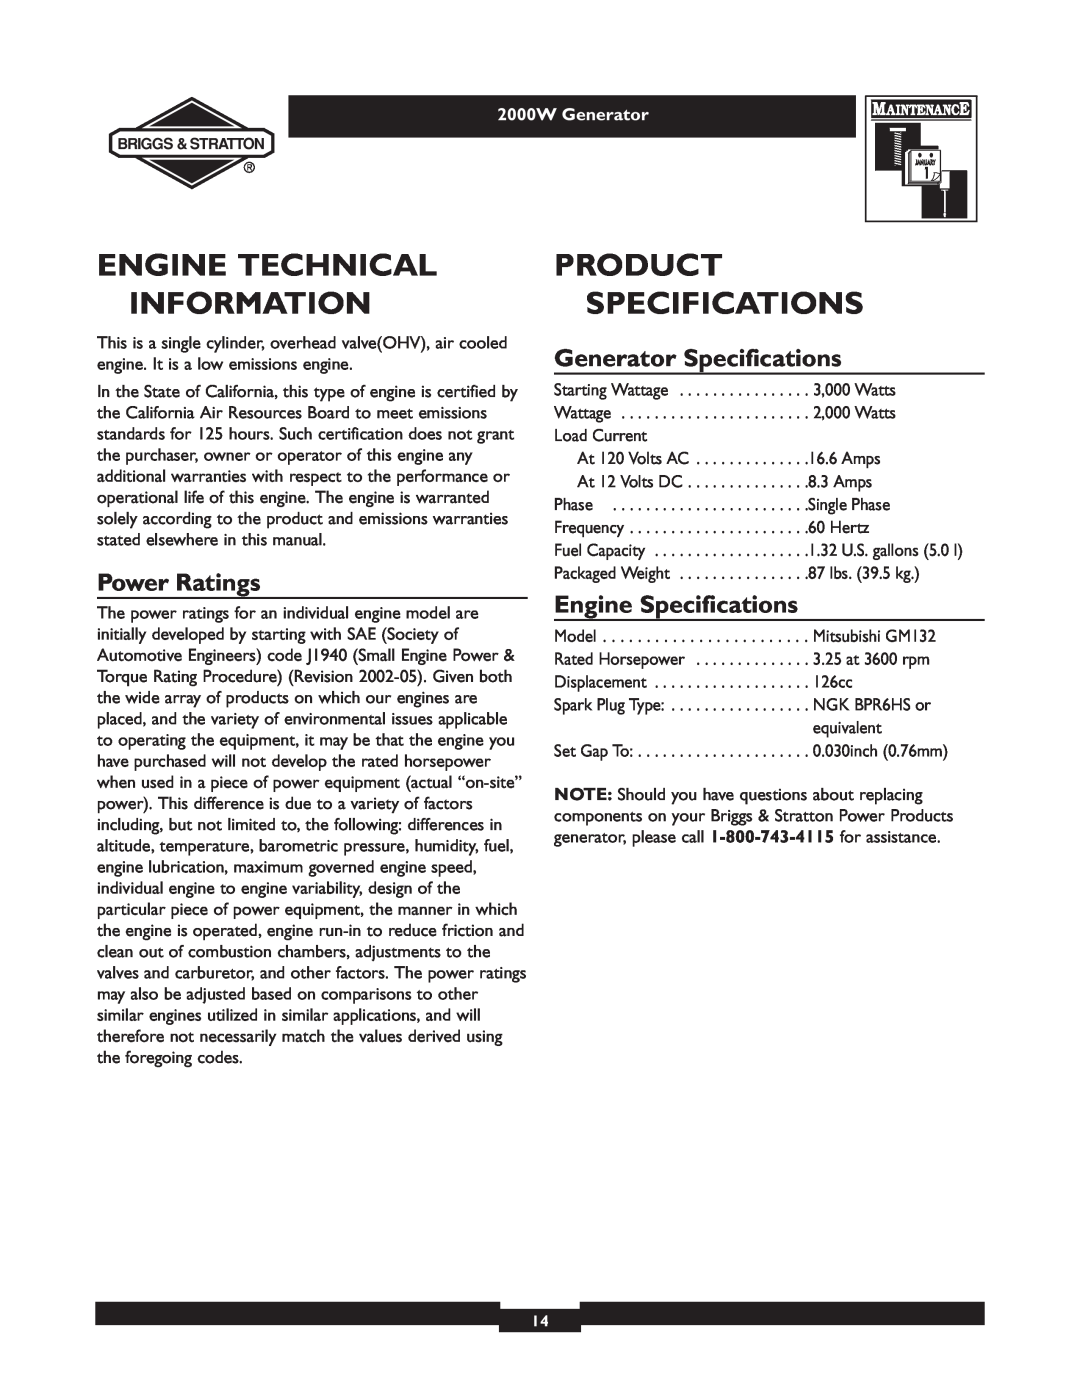 Briggs & Stratton 30239 Engine Technical Information, Product Specifications, Power Ratings, Generator Specifications 